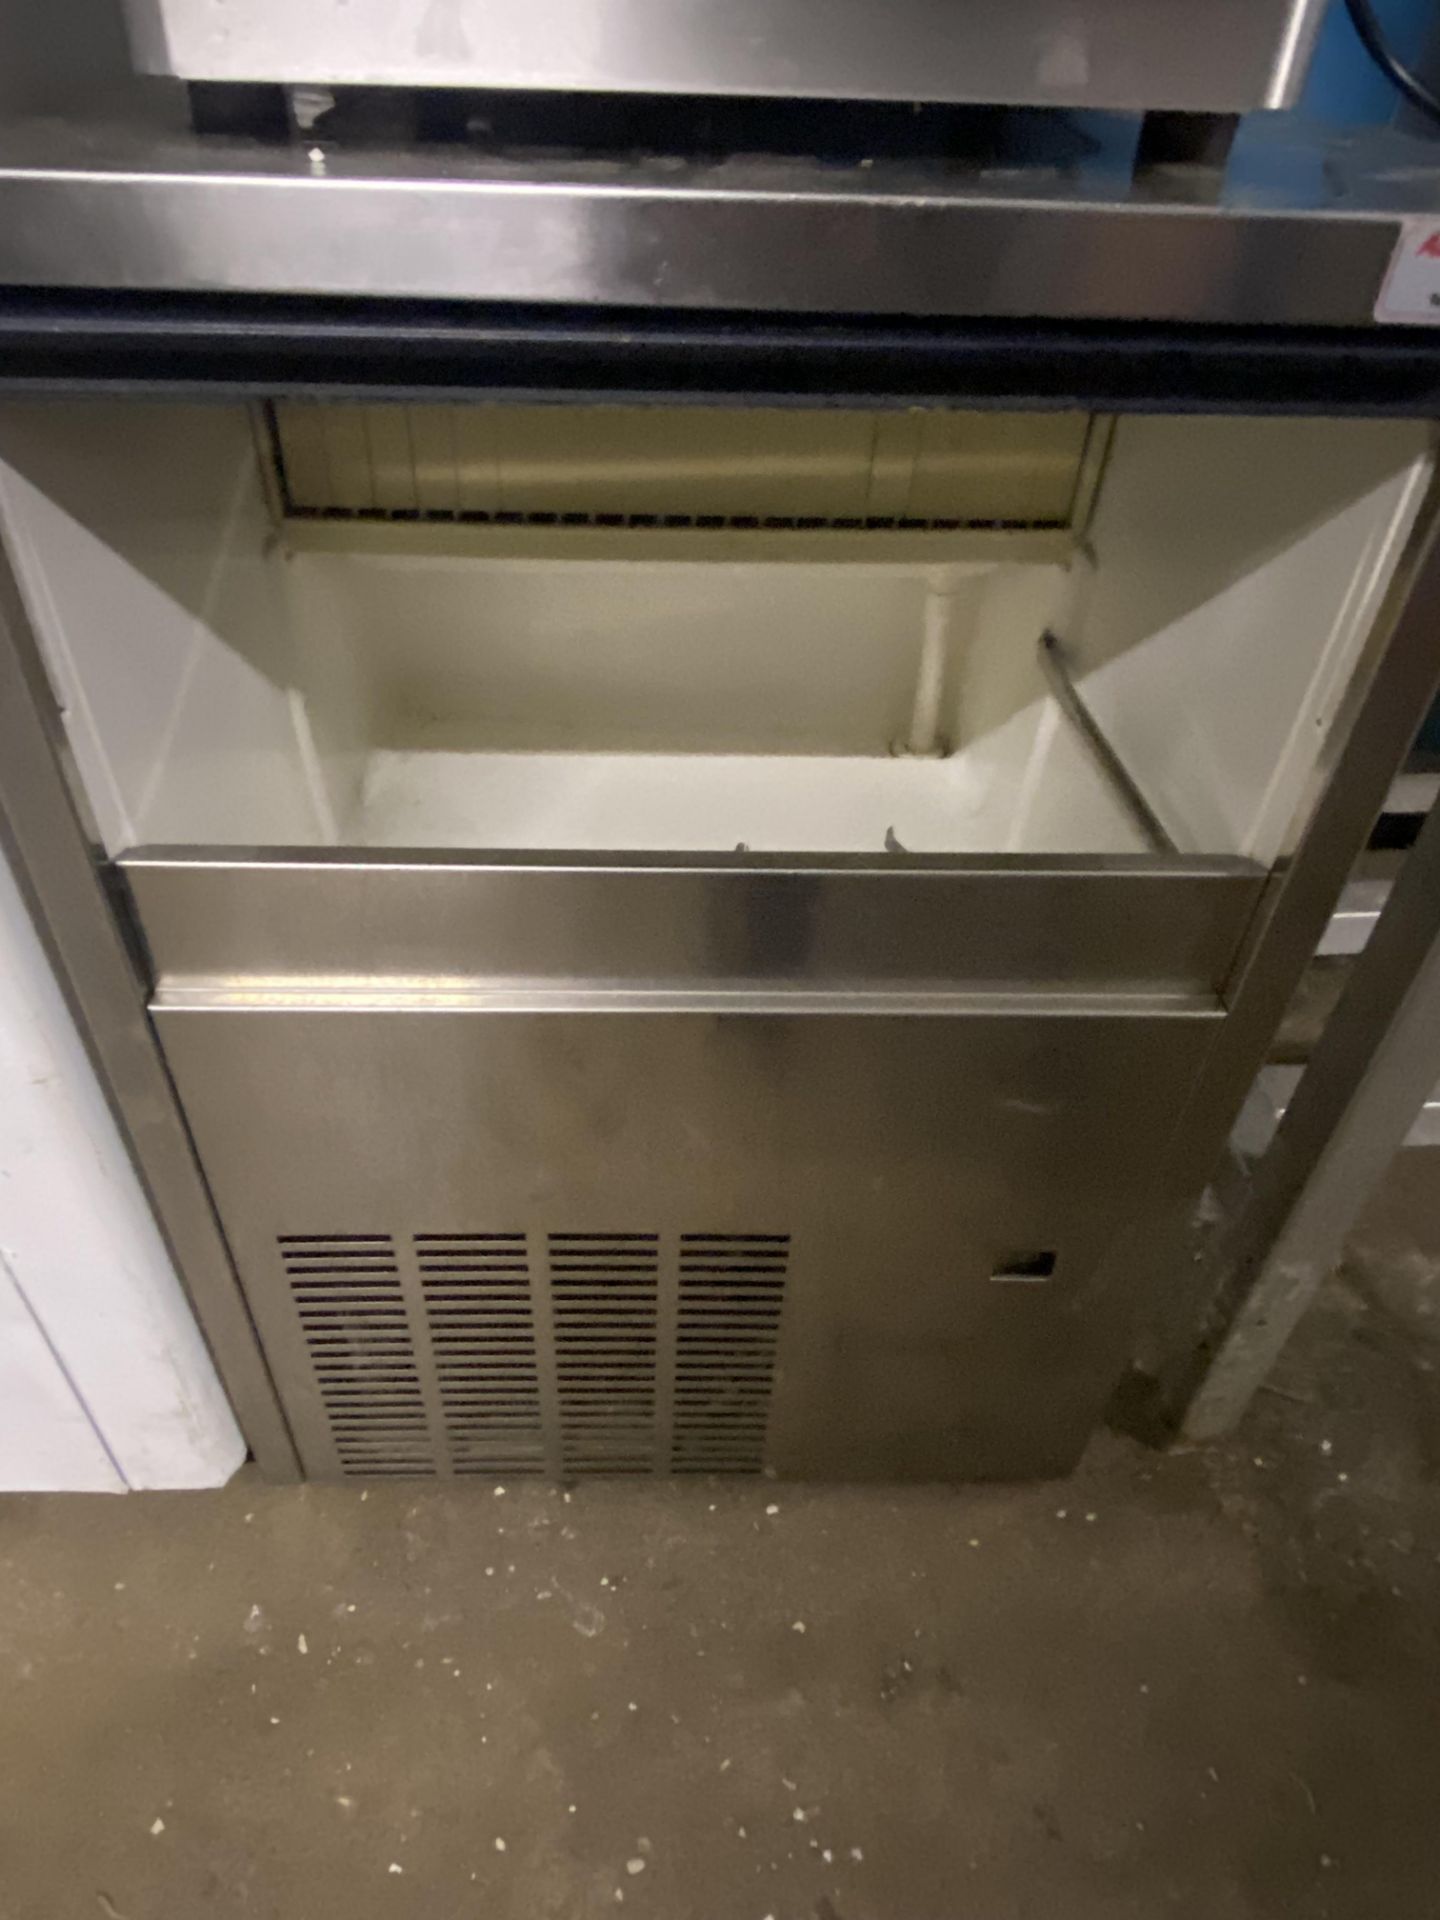 Unbranded stainless steel ice maker - Image 2 of 3